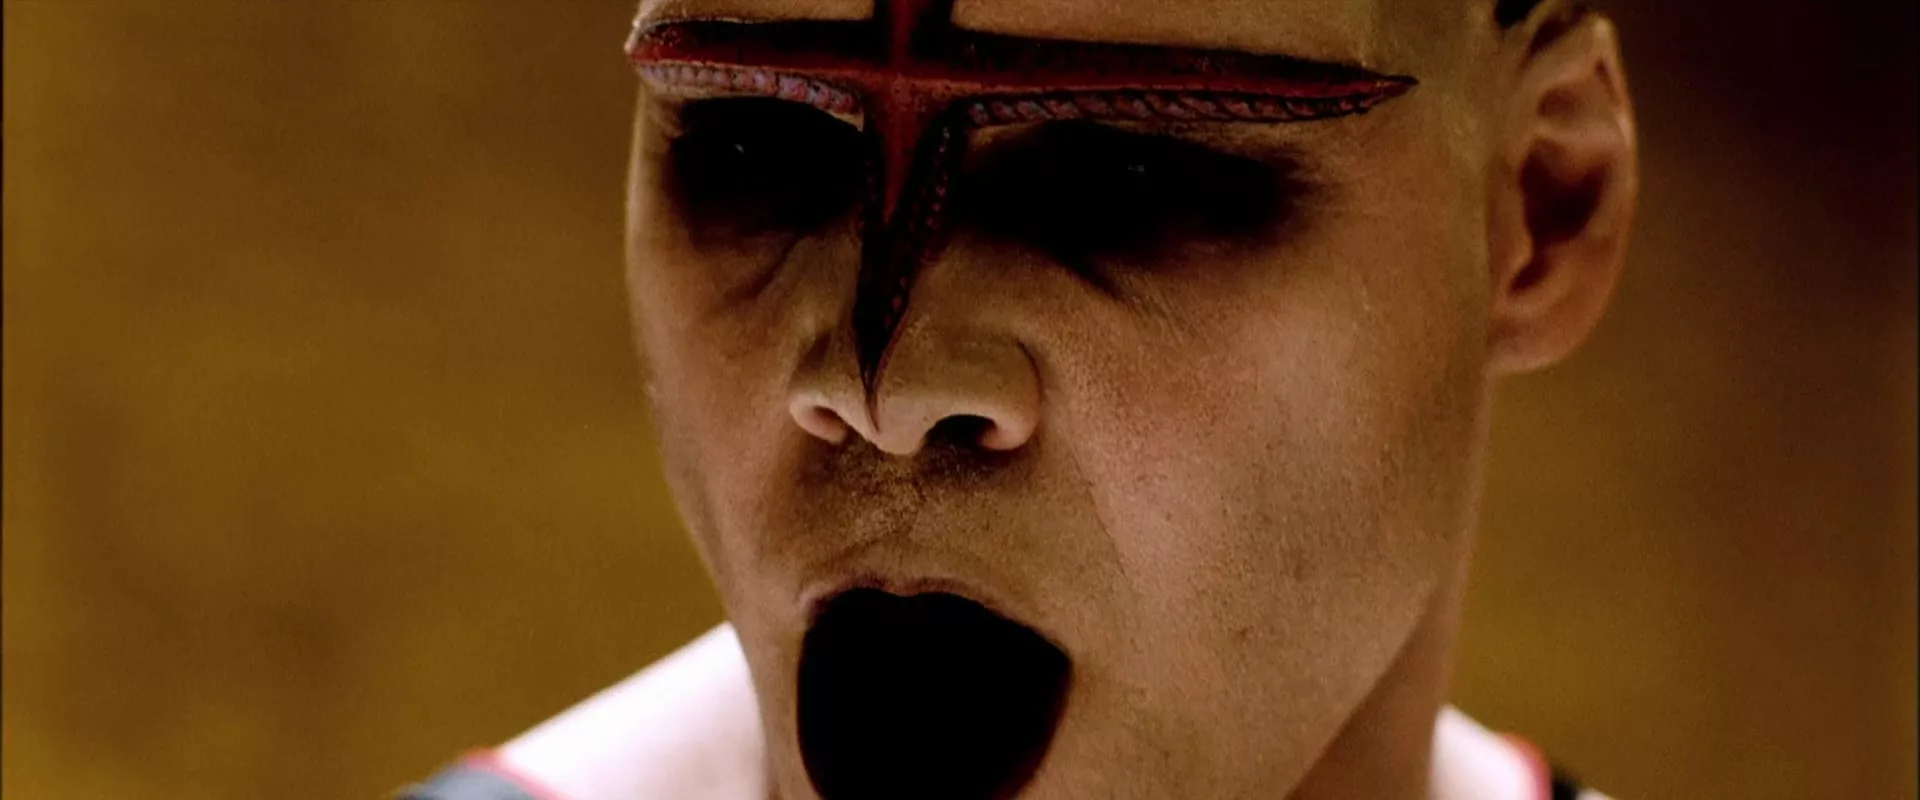 A Japanese man with a cross on his forehead and a black gaping hole instead of a mouth